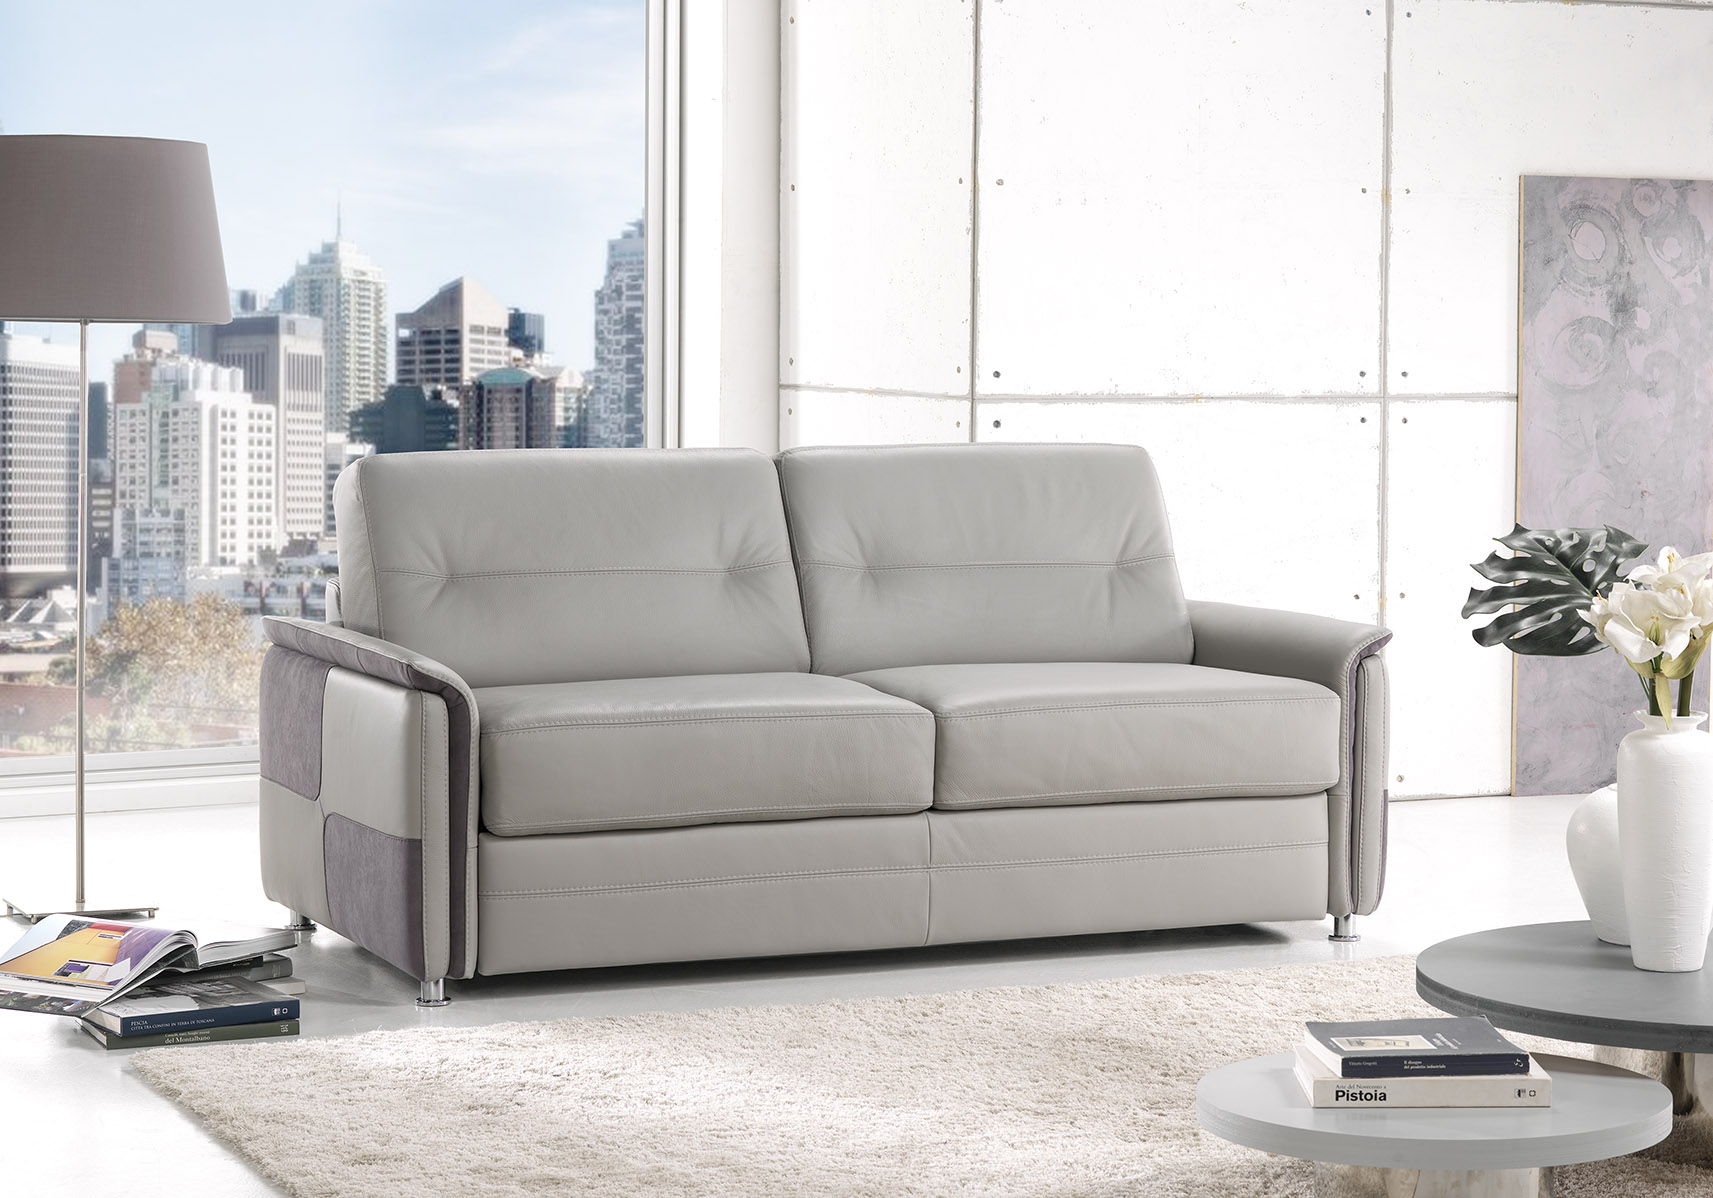 Brands Satis Living Room & coffee tables, Italy Vela Sofa Bed